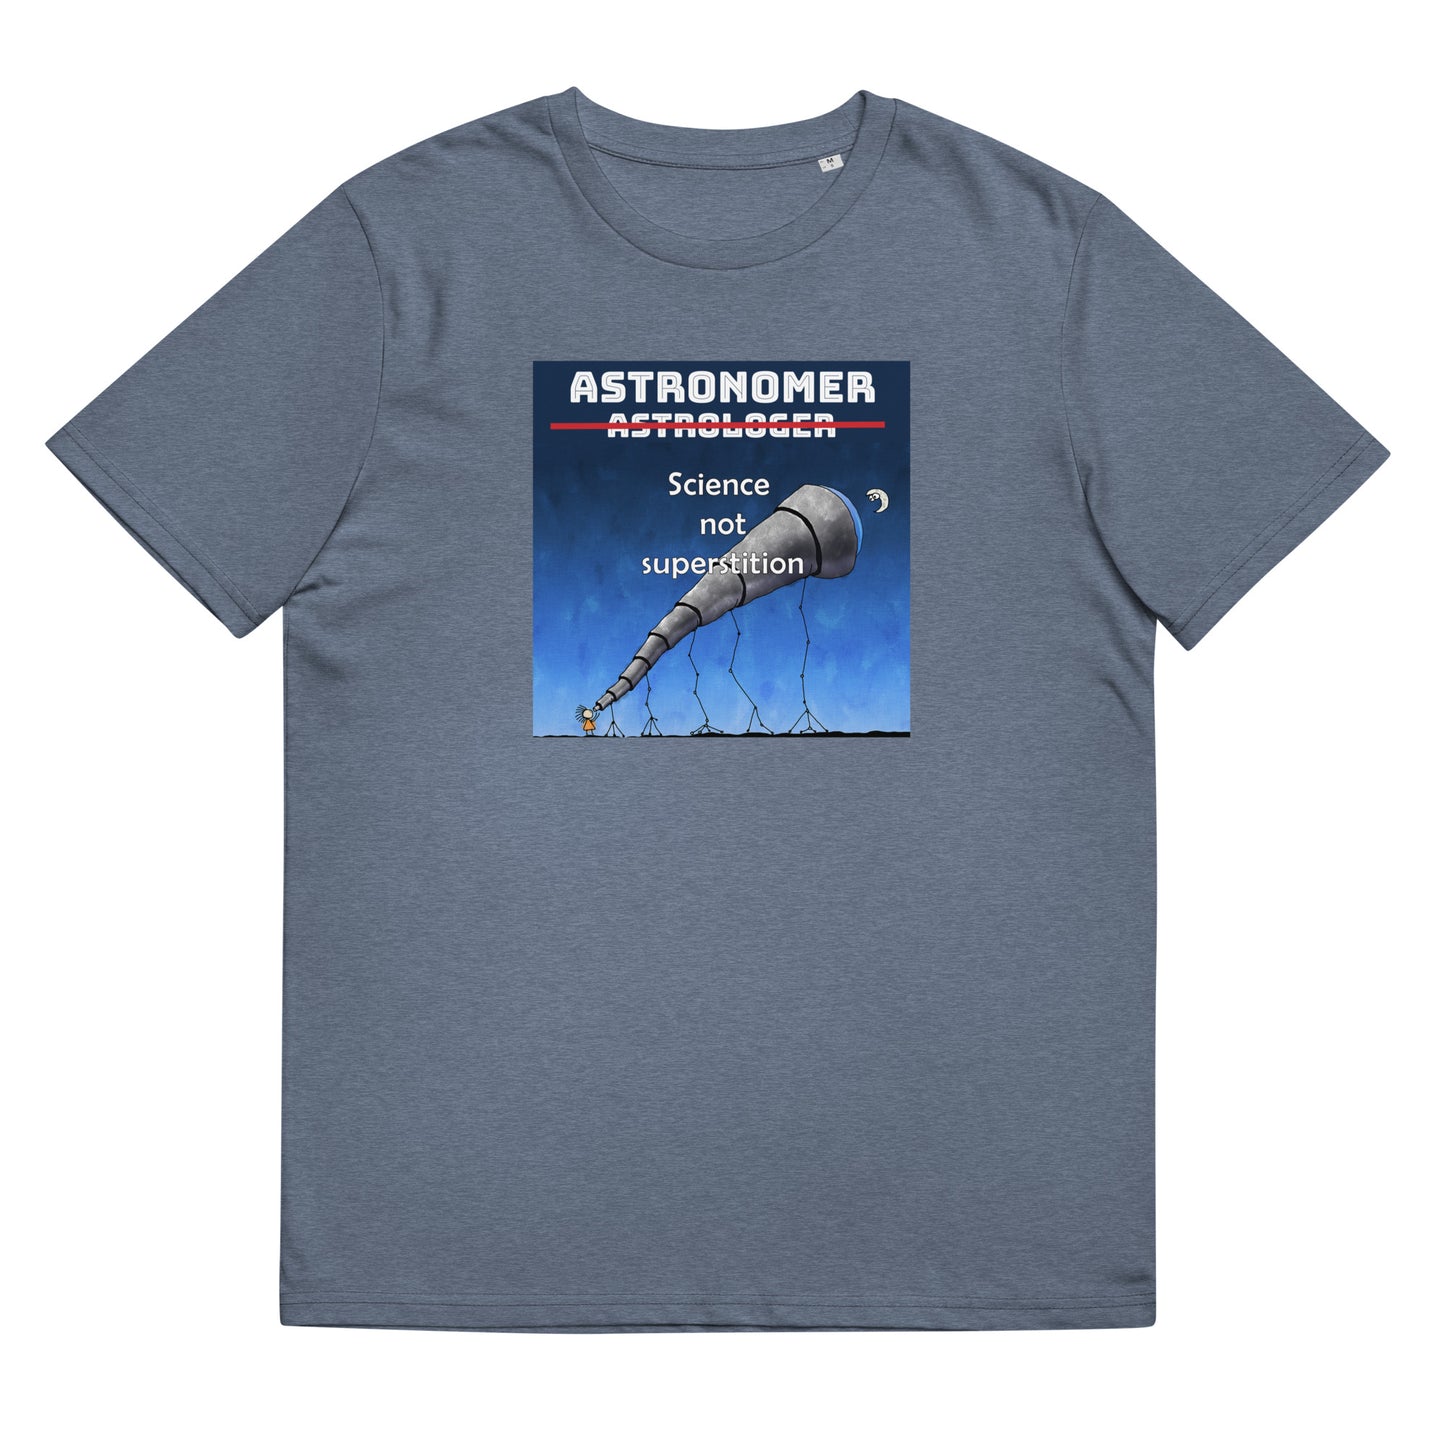 Unisex organic cotton t-shirt Astronomer Not Astrologer, Science not superstition